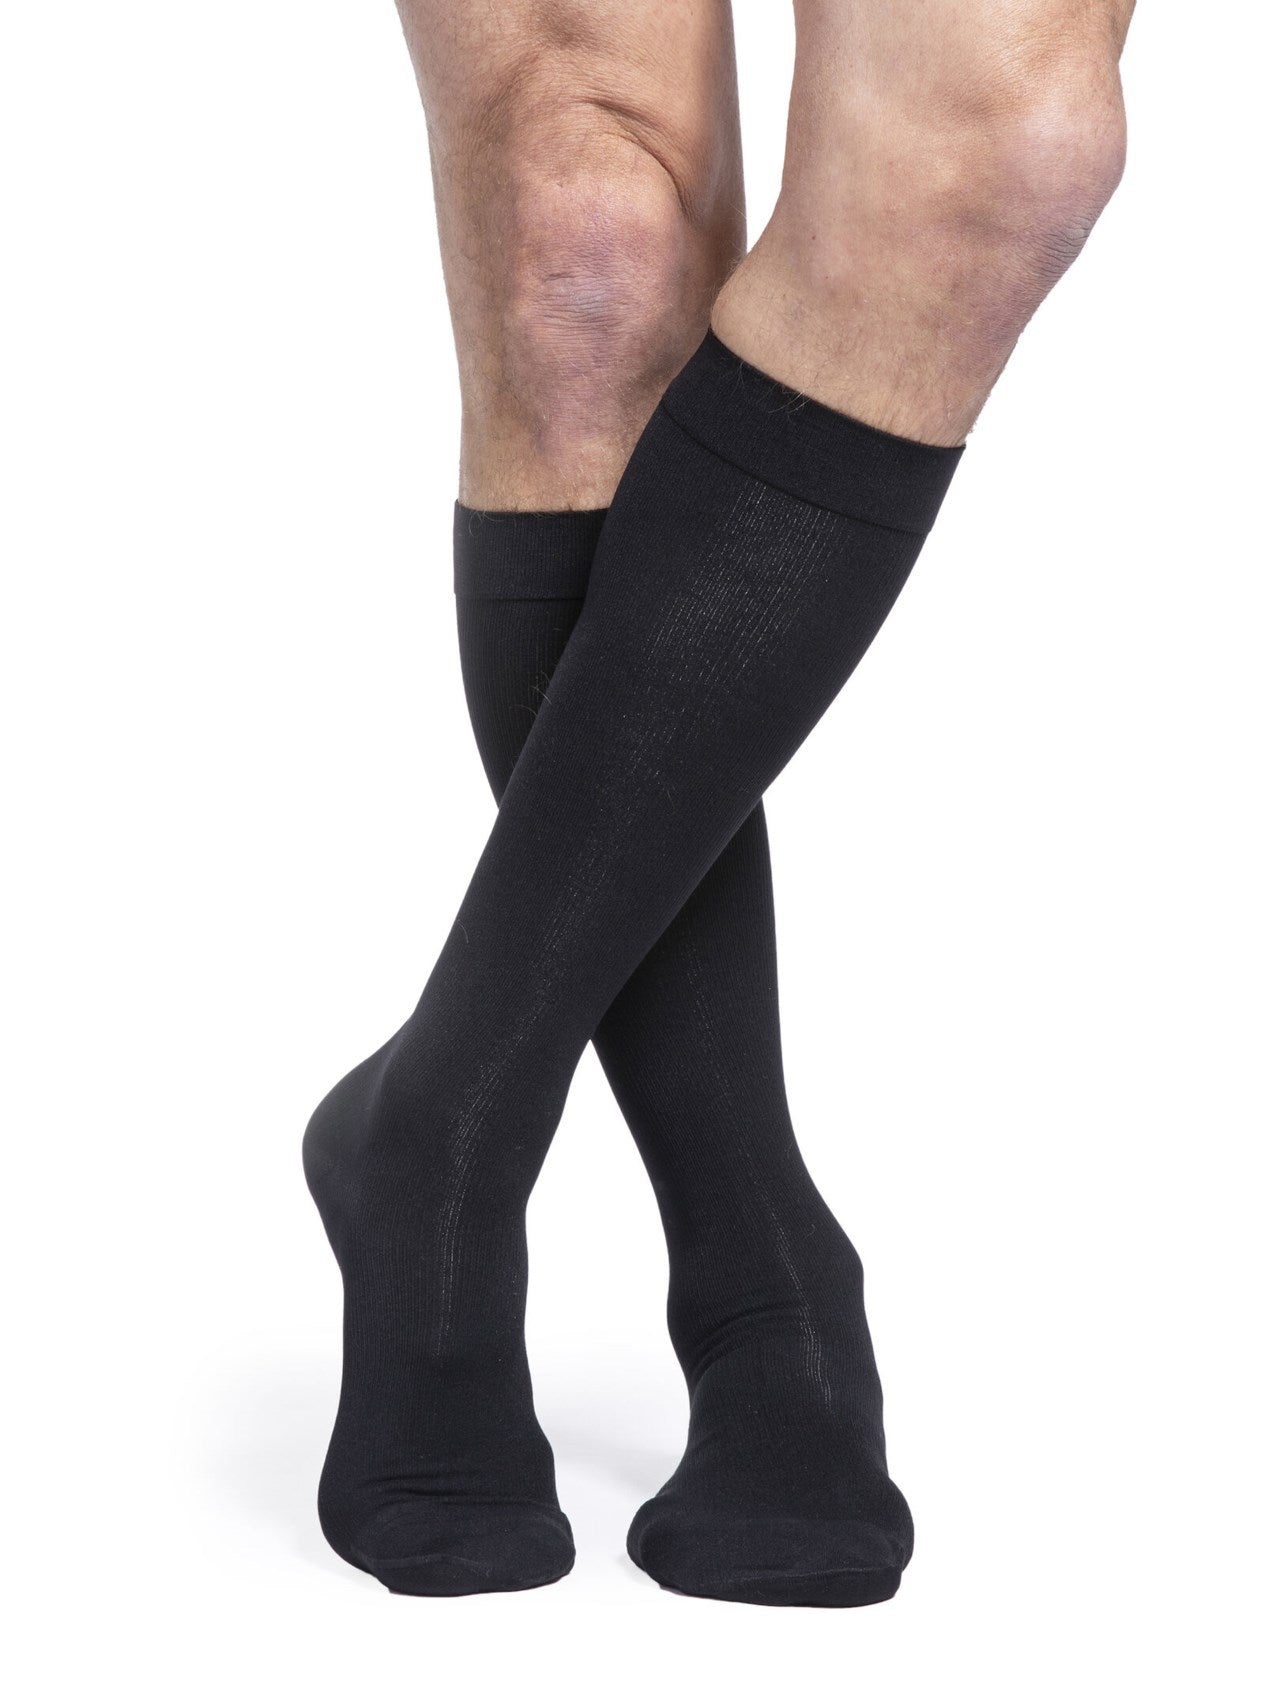 Sigvaris 230 Essential Cotton Compression Socks 20-30 mmHg Calf High for Women Closed Toe